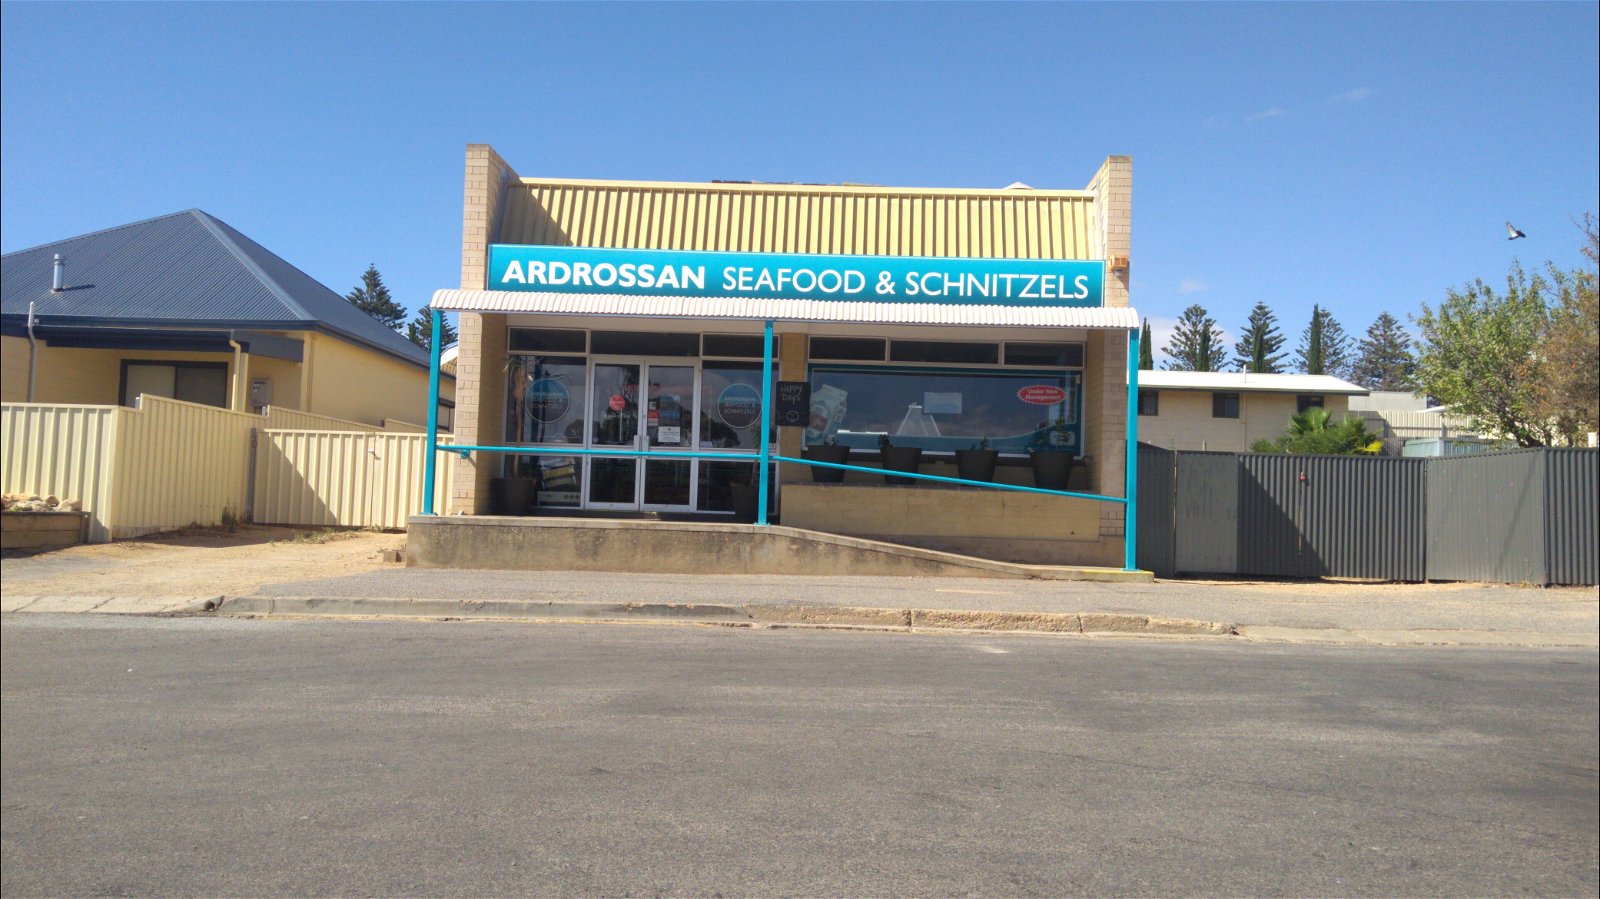 Ardrossan Seafood and Schnitzels - Broome Tourism